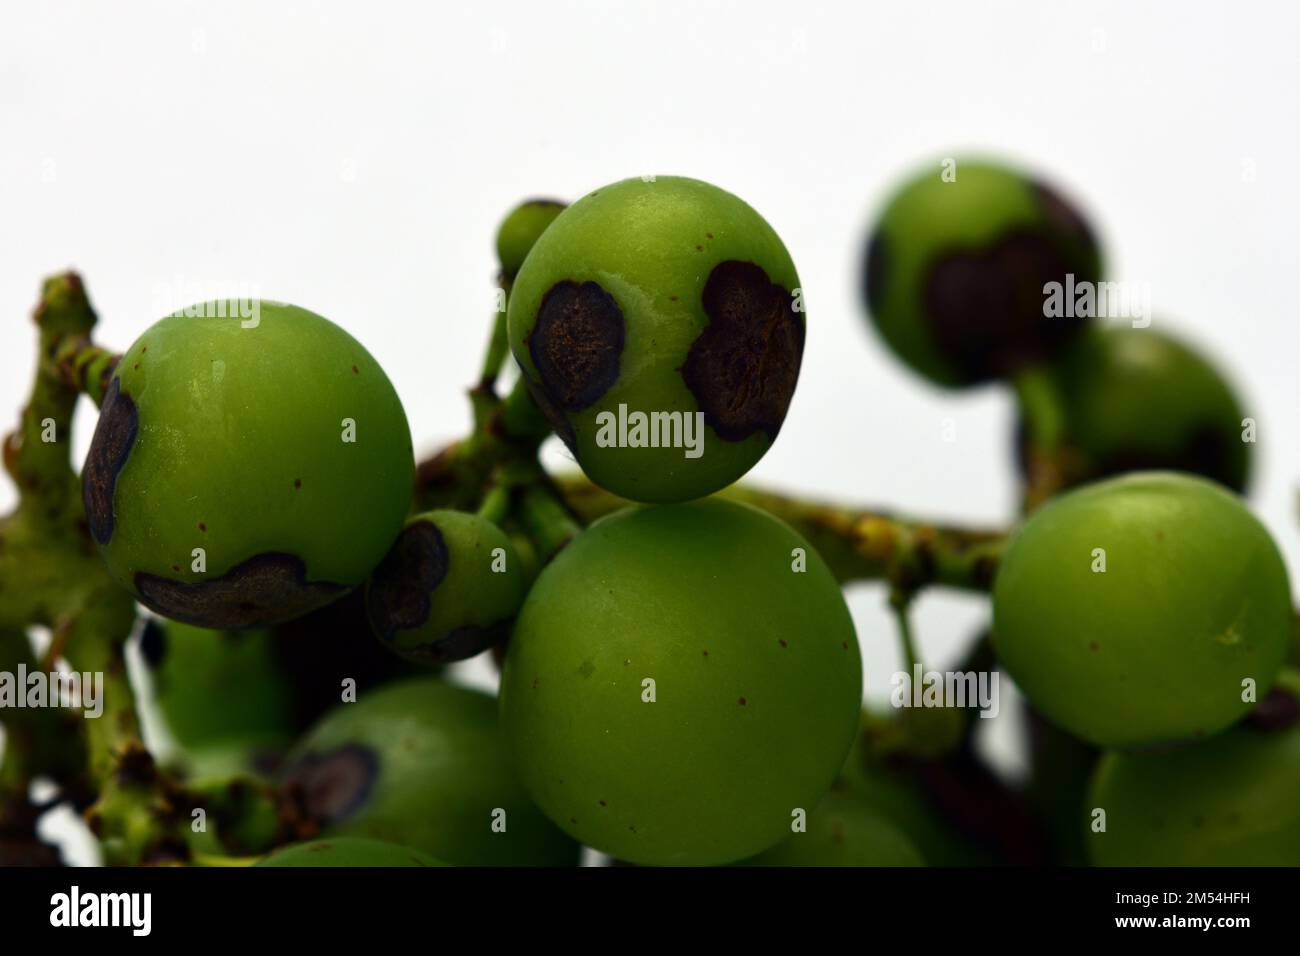 Black spot, or anthracnose disease of grapevines caused by fungus Elsinoe ampelina. Stock Photo